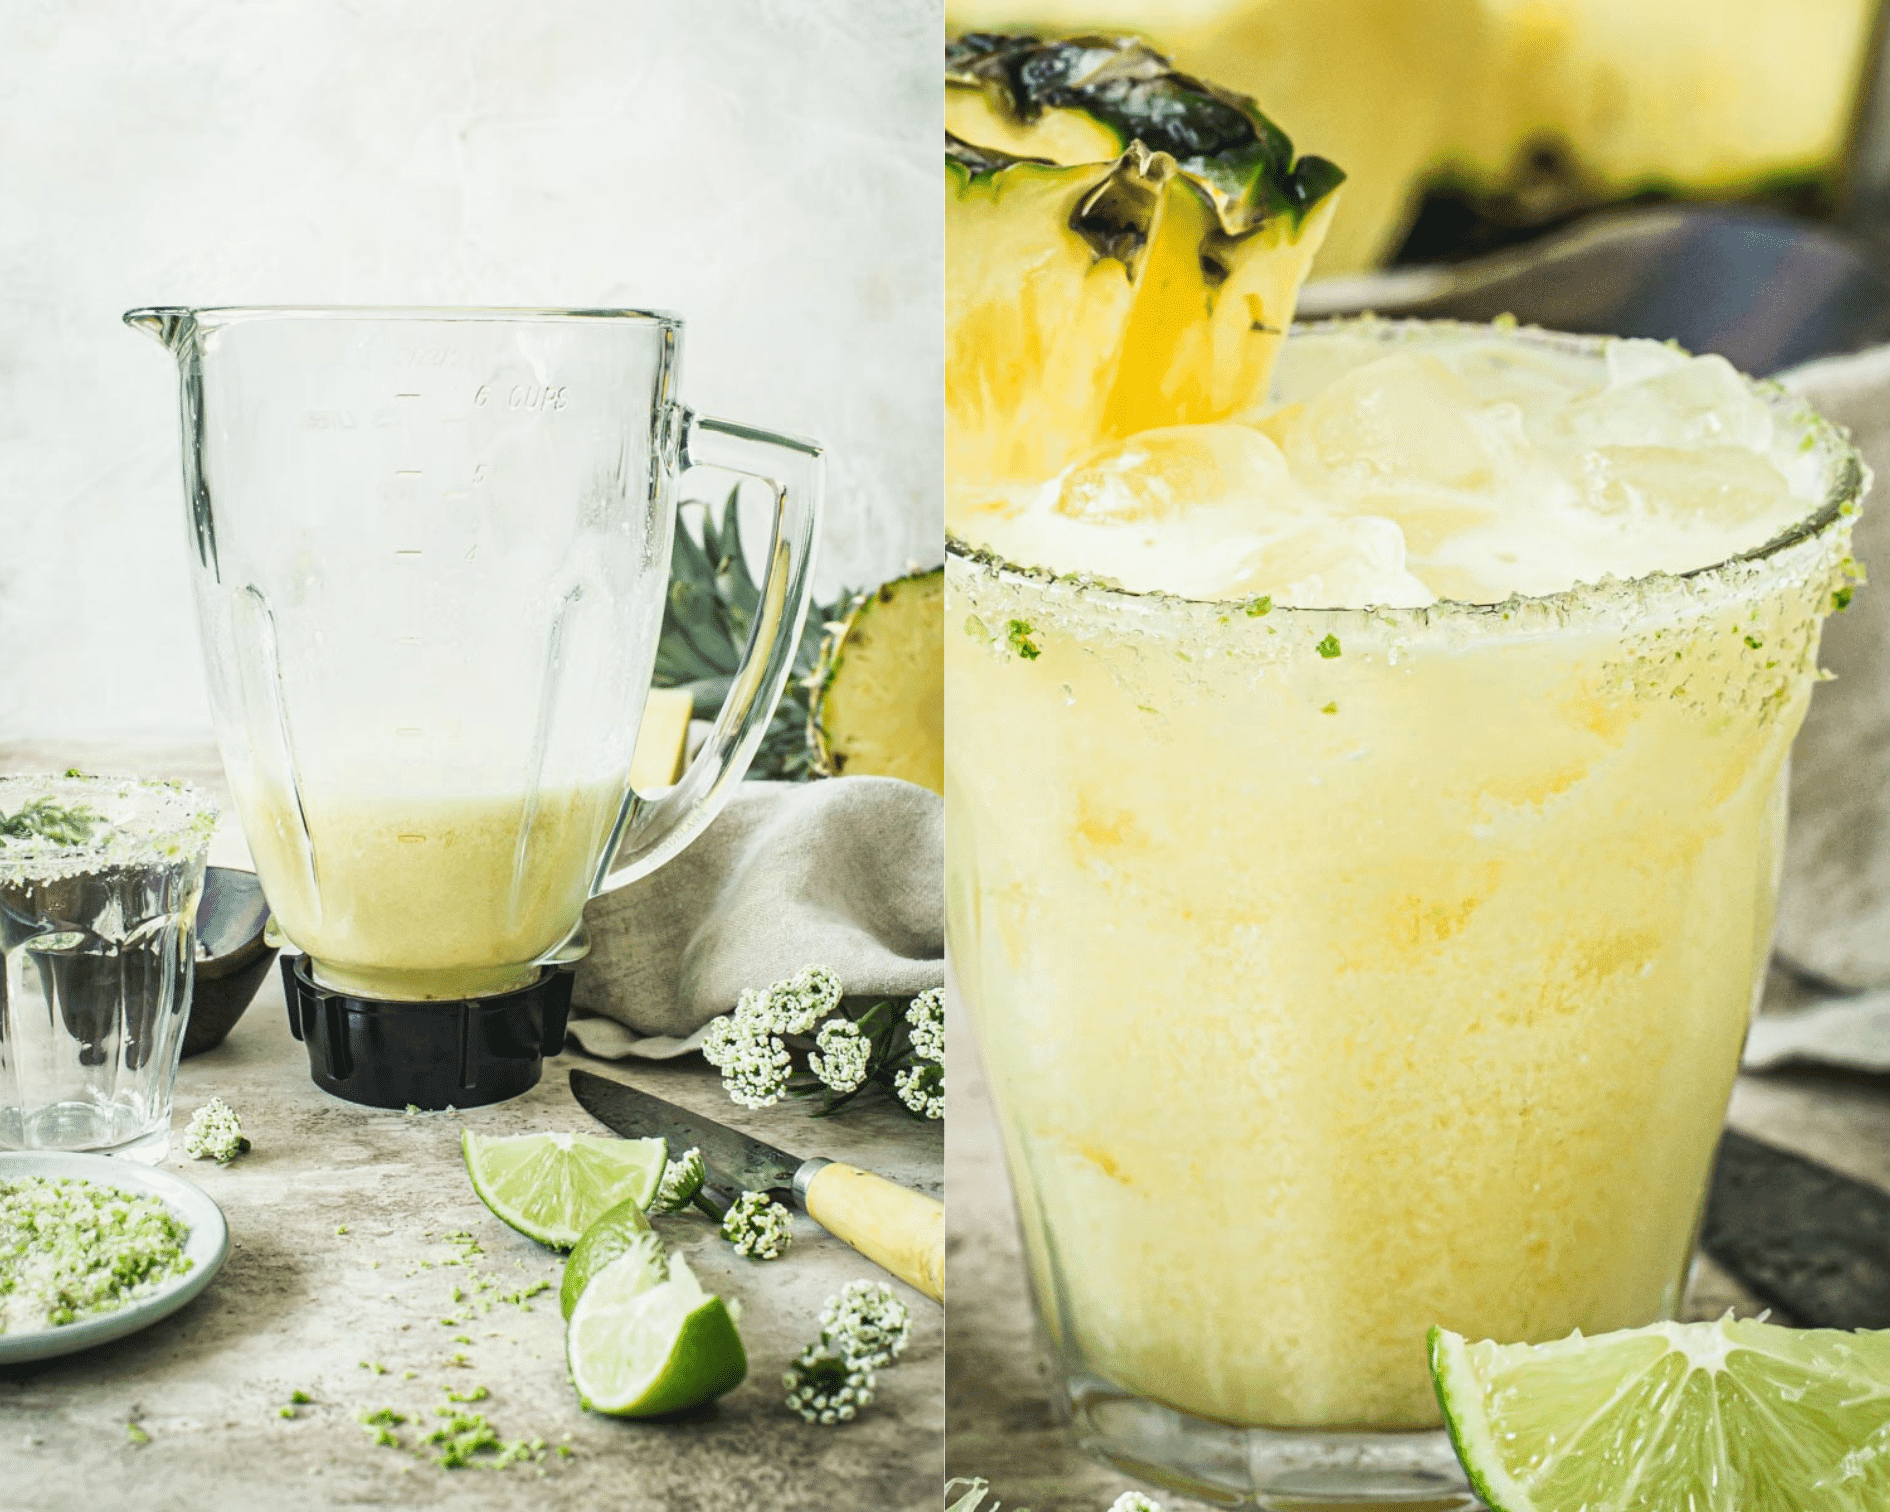 Pineapple coconut mixture in a mixer on left and pineapple coconut margarita in a glass on right.